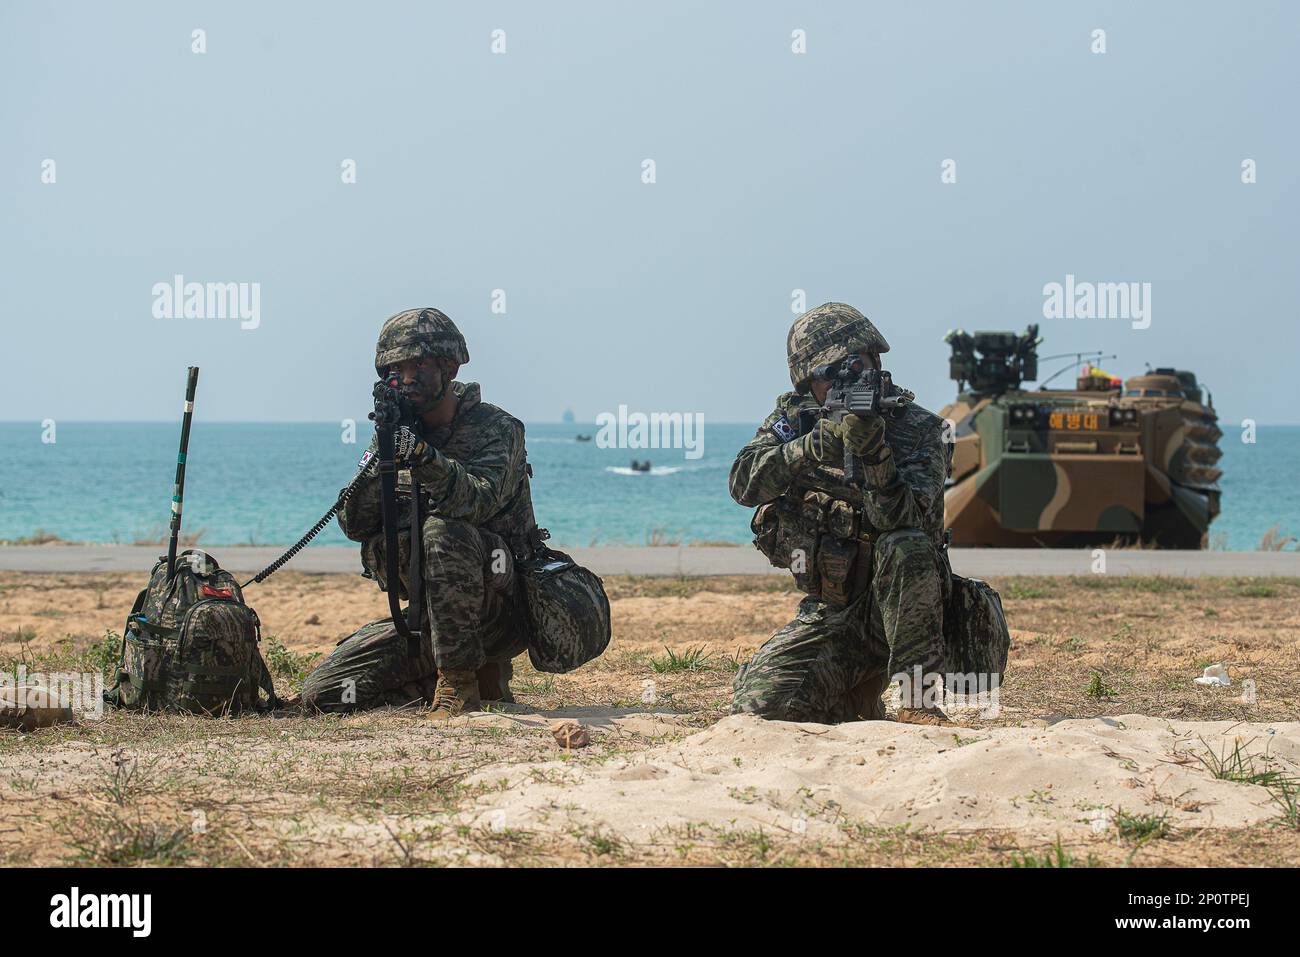 South Korean marines participate in an amphibious assault exercise as part of the Cobra Gold 2023 joint military exercise at the military base in Sattahip, Chonburi. The Cobra Gold exercise is the largest joint multilateral military exercise in Southeast Asia, co-hosted annually in Thailand by the Royal Thai Armed Forces (RTARF) and the U.S. Indo-Pacific Command. The Cobra Gold 2023 on this year's the 42nd iteration with seven fully participating countries ñ Thailand, the United States, Singapore, Japan, Indonesia, the Republic of Korea, and Malaysia. Stock Photo